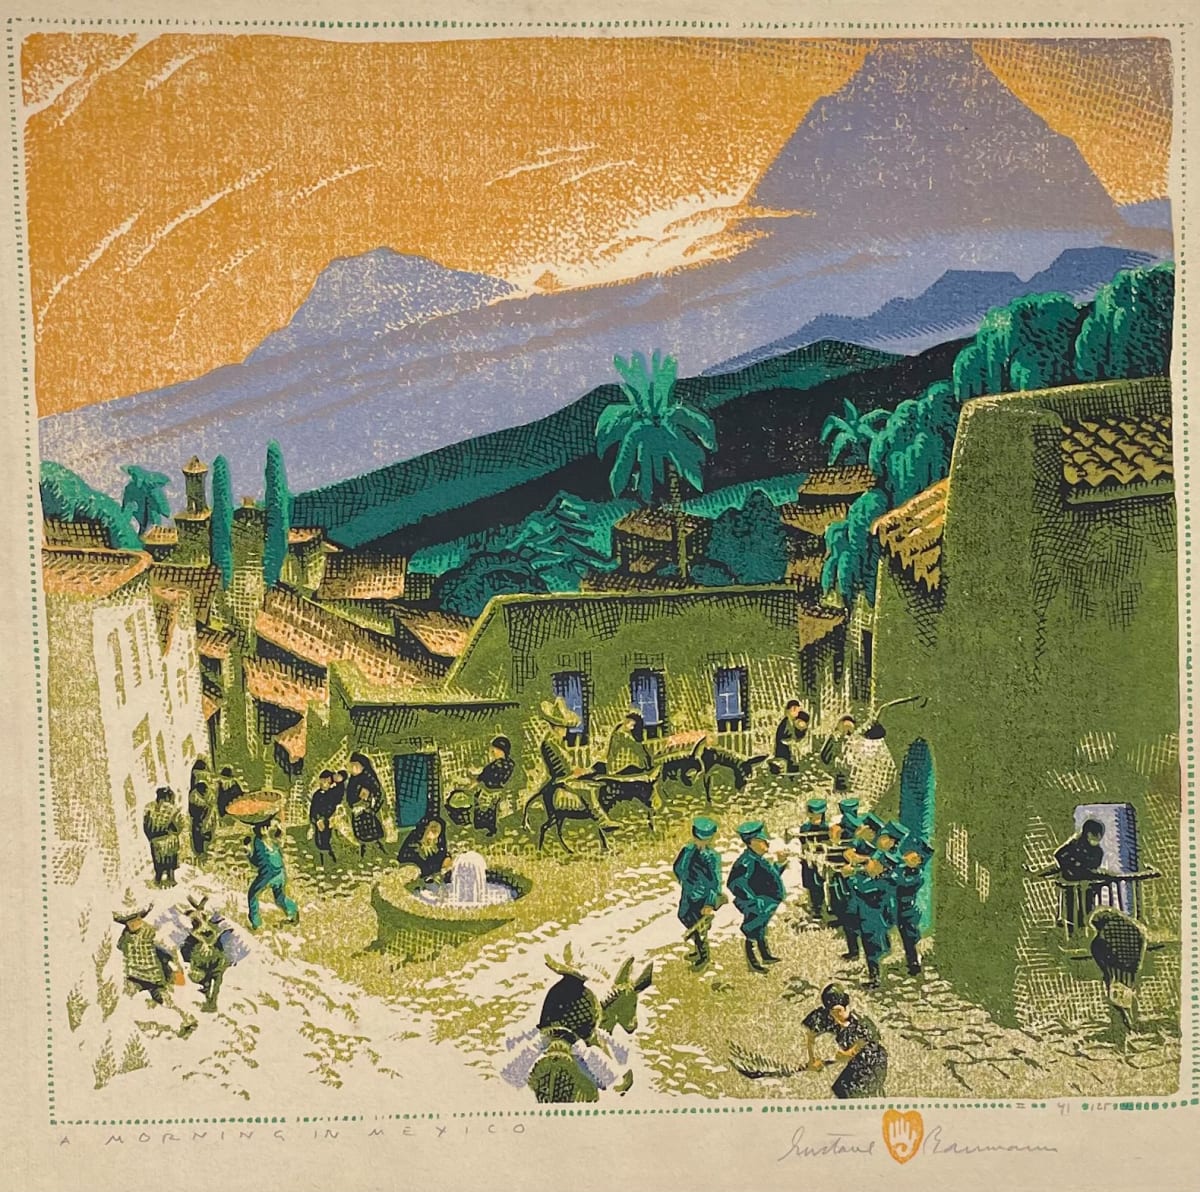 Morning in Mexico by Gustave Baumann 